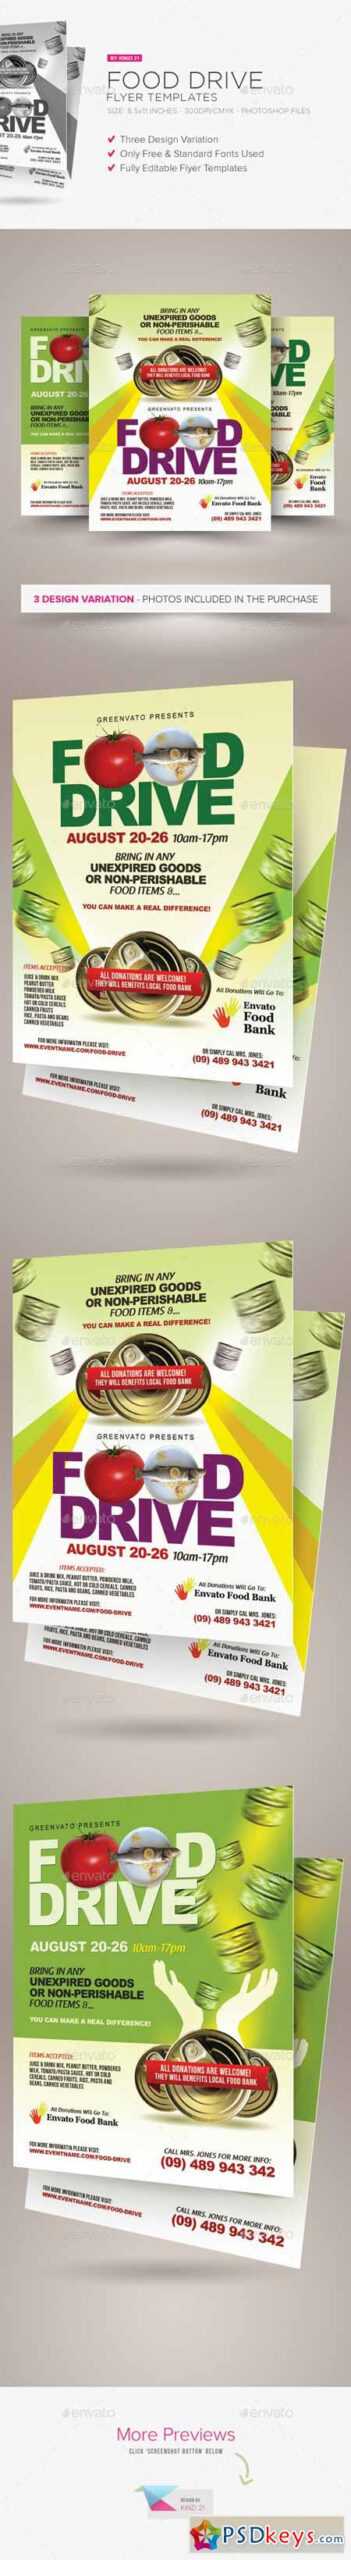 Food Drive Flyer Templates 11493589 » Free Download For Food Drive Flyer Template